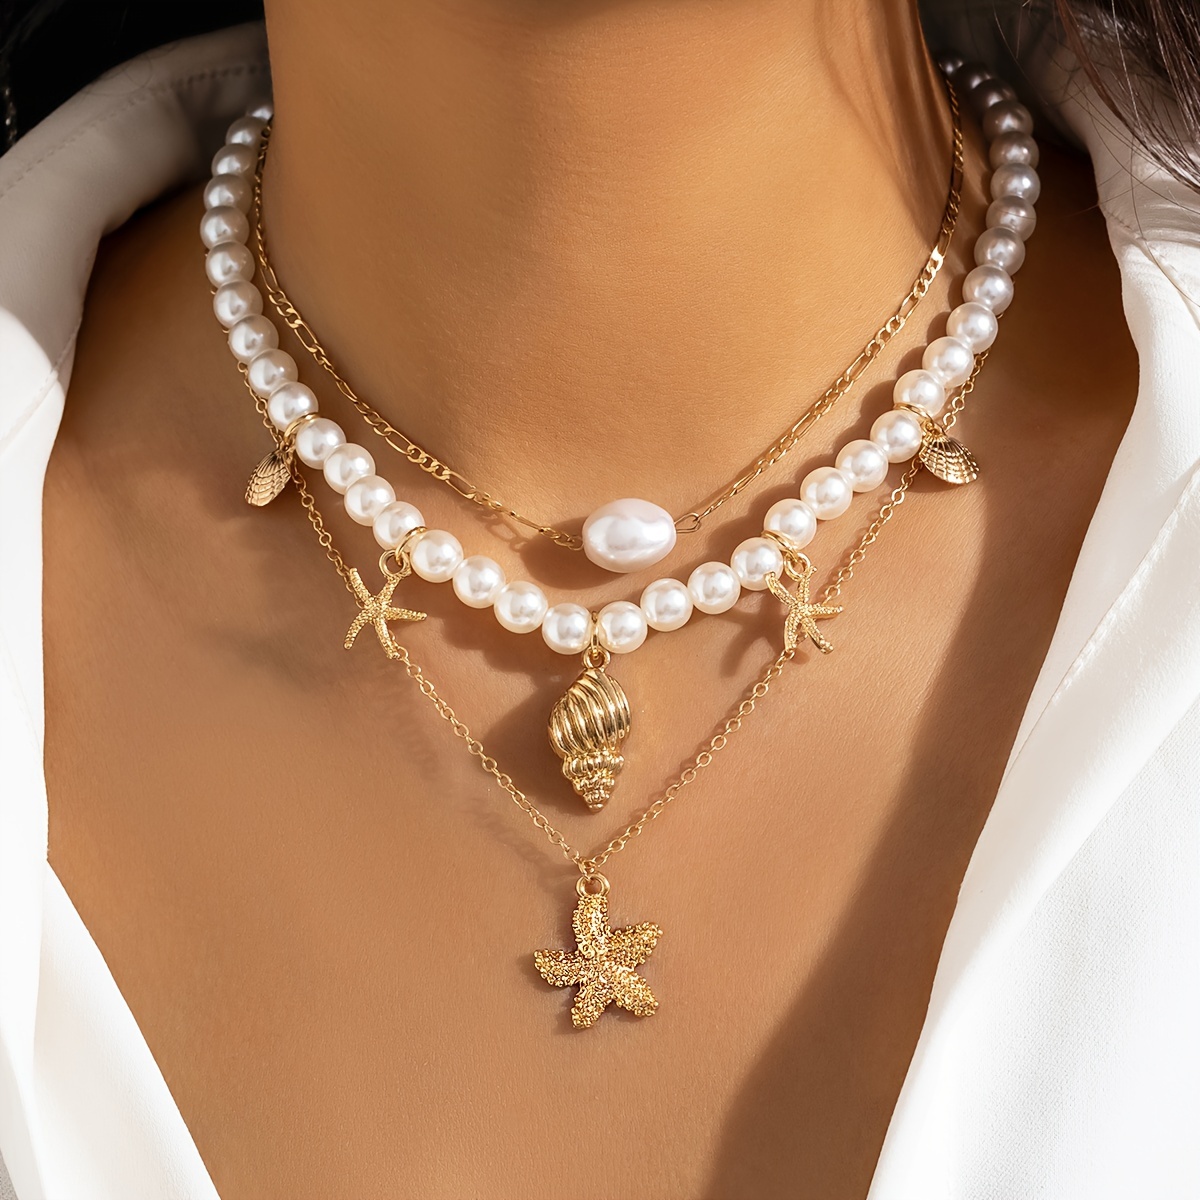 

Simple & Nautical Style Acrylic Pearl Necklace Set With Shell & Starfish Pendants For Women - 3 Piece Fashion Summer Beach Party Jewelry No Plating - Versatile For All Seasons